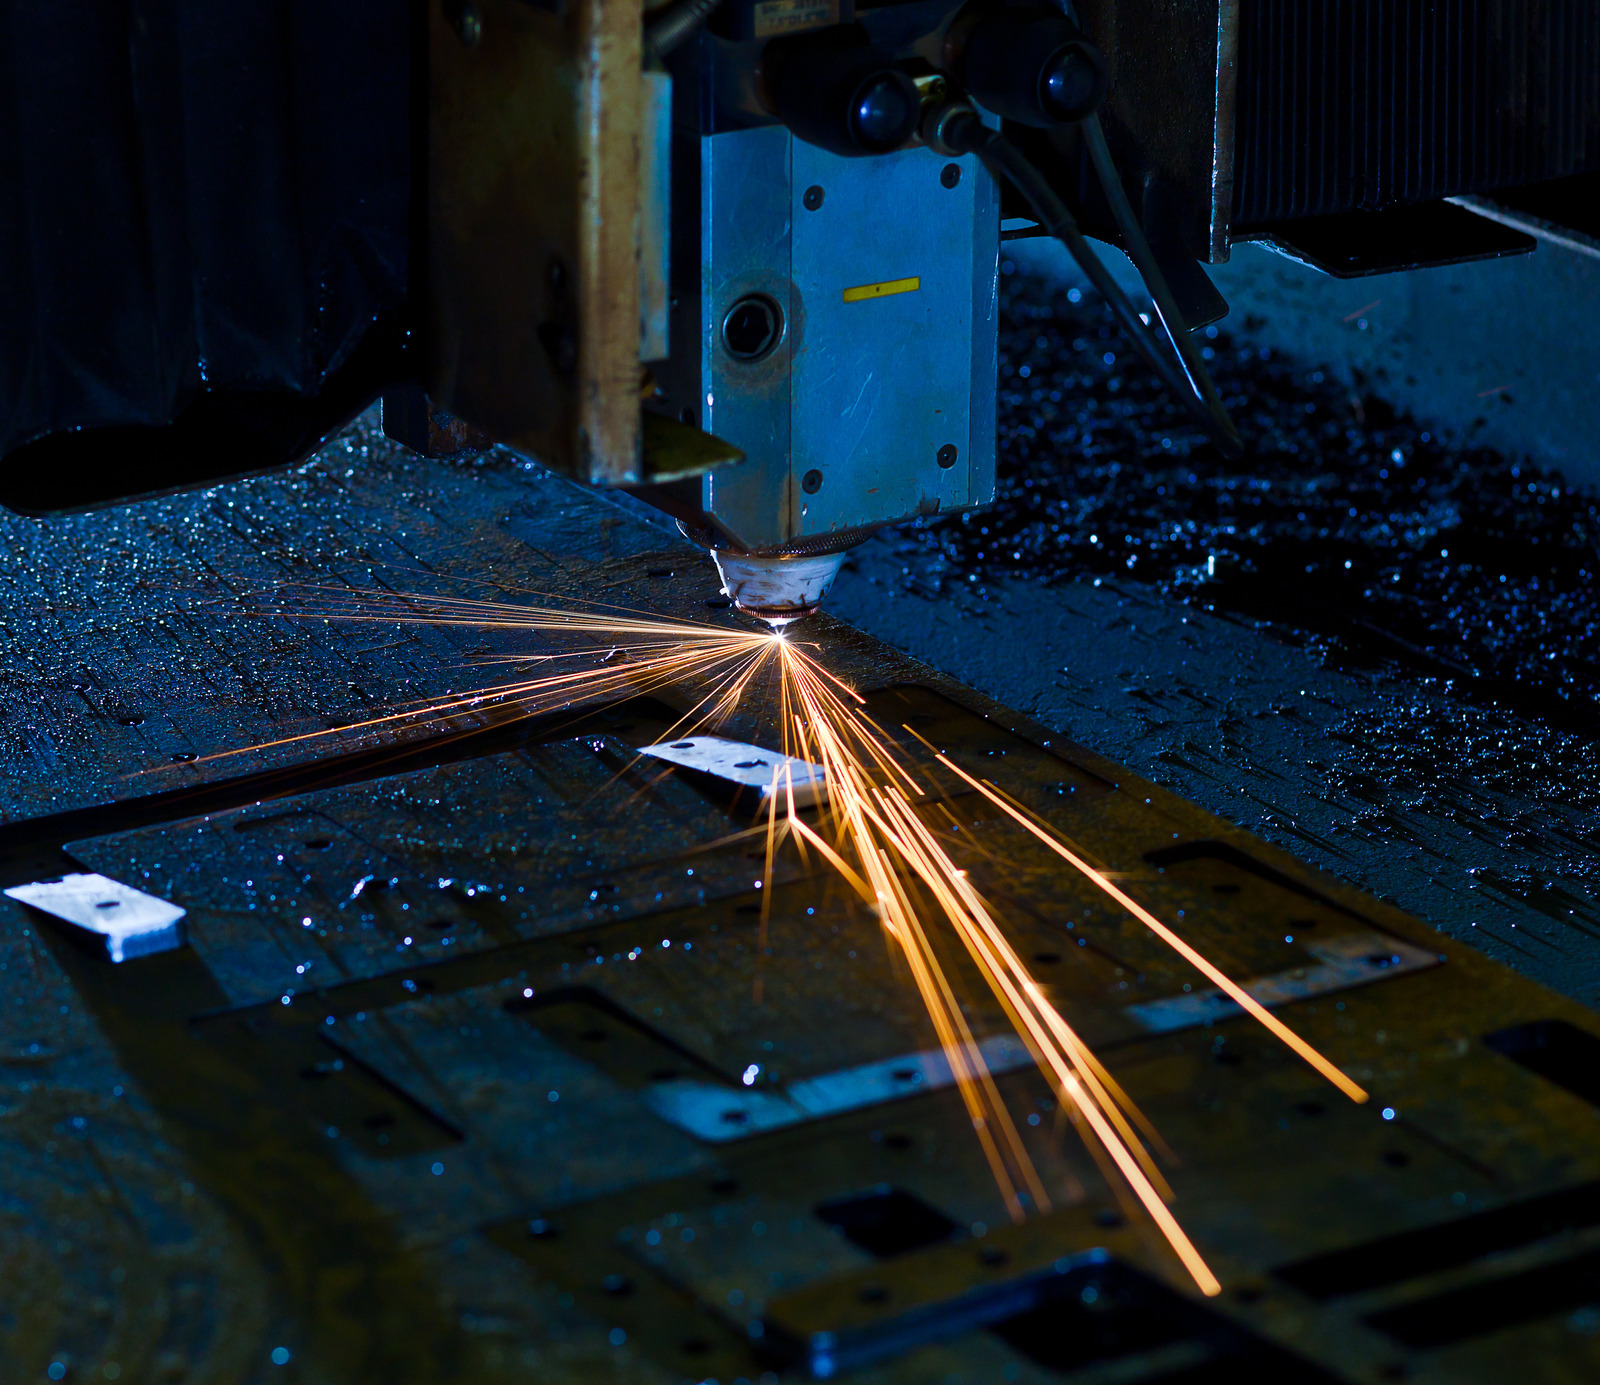 Understanding Laser Cutting Machines and their Capabilities